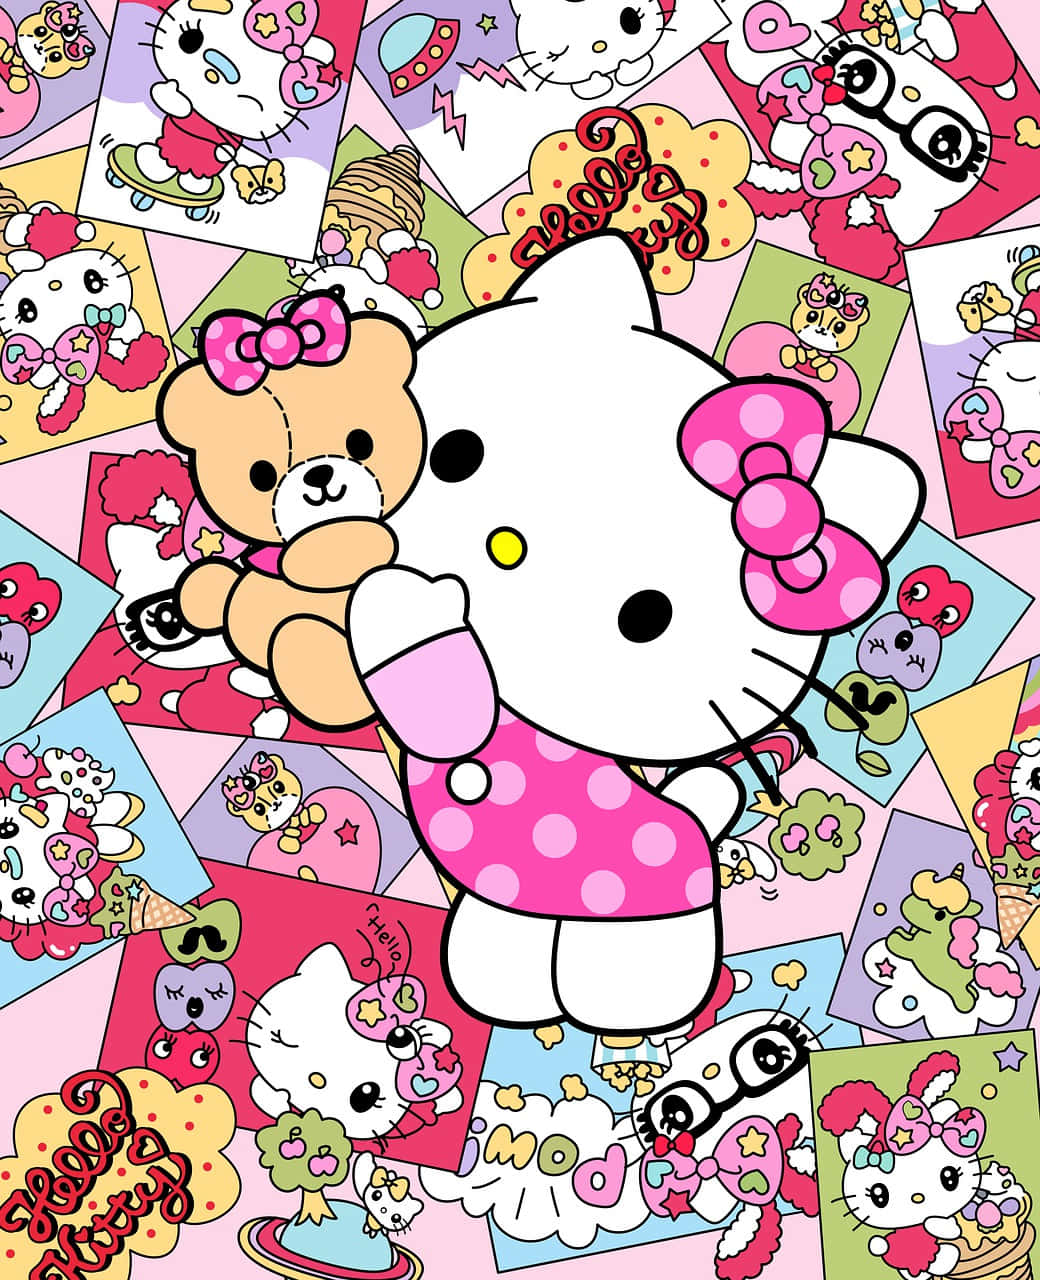 Celebrate life with Hello Kitty.